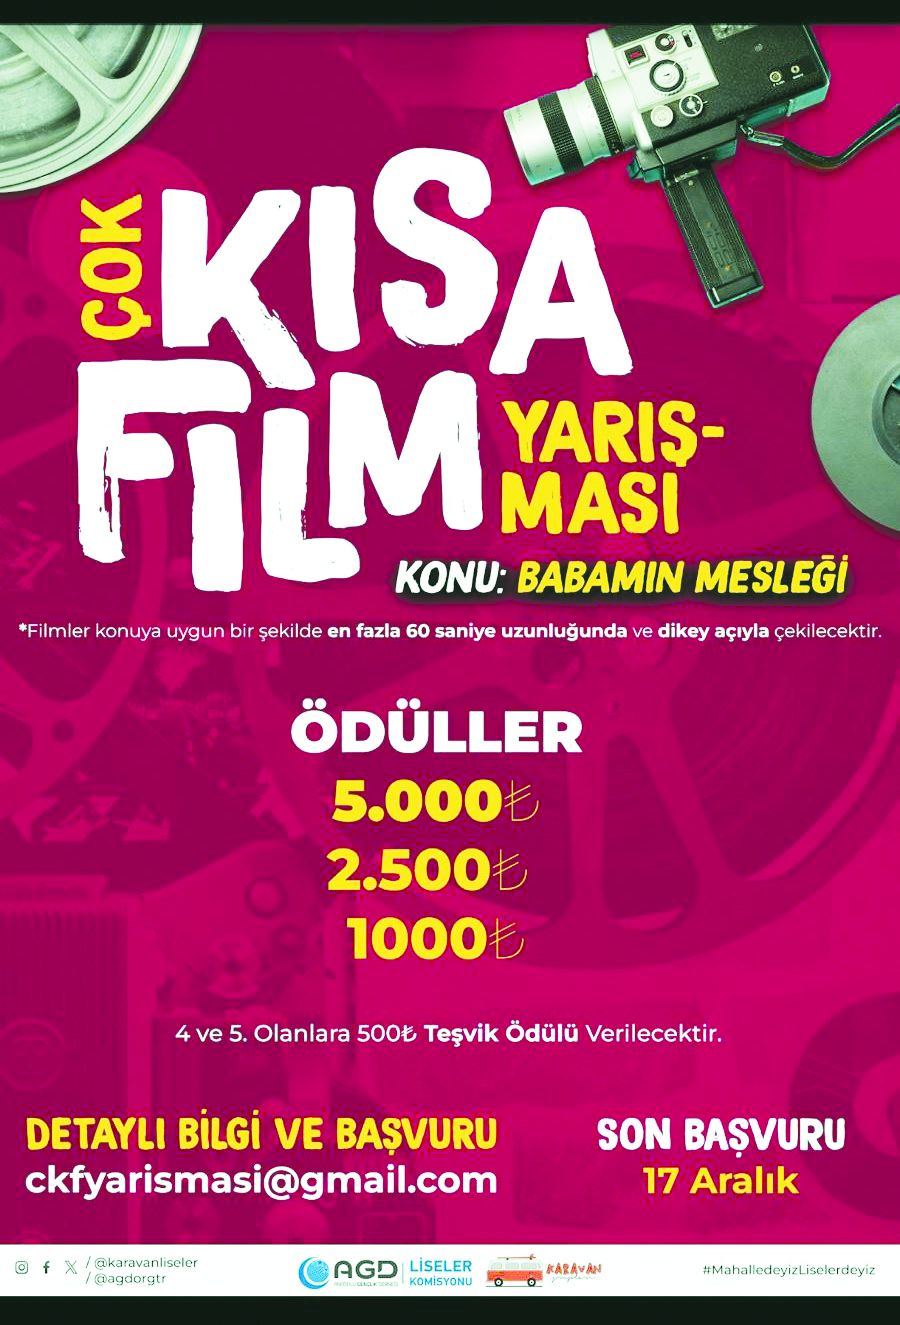 Anatolian Youth Association organizes a Short Film competition